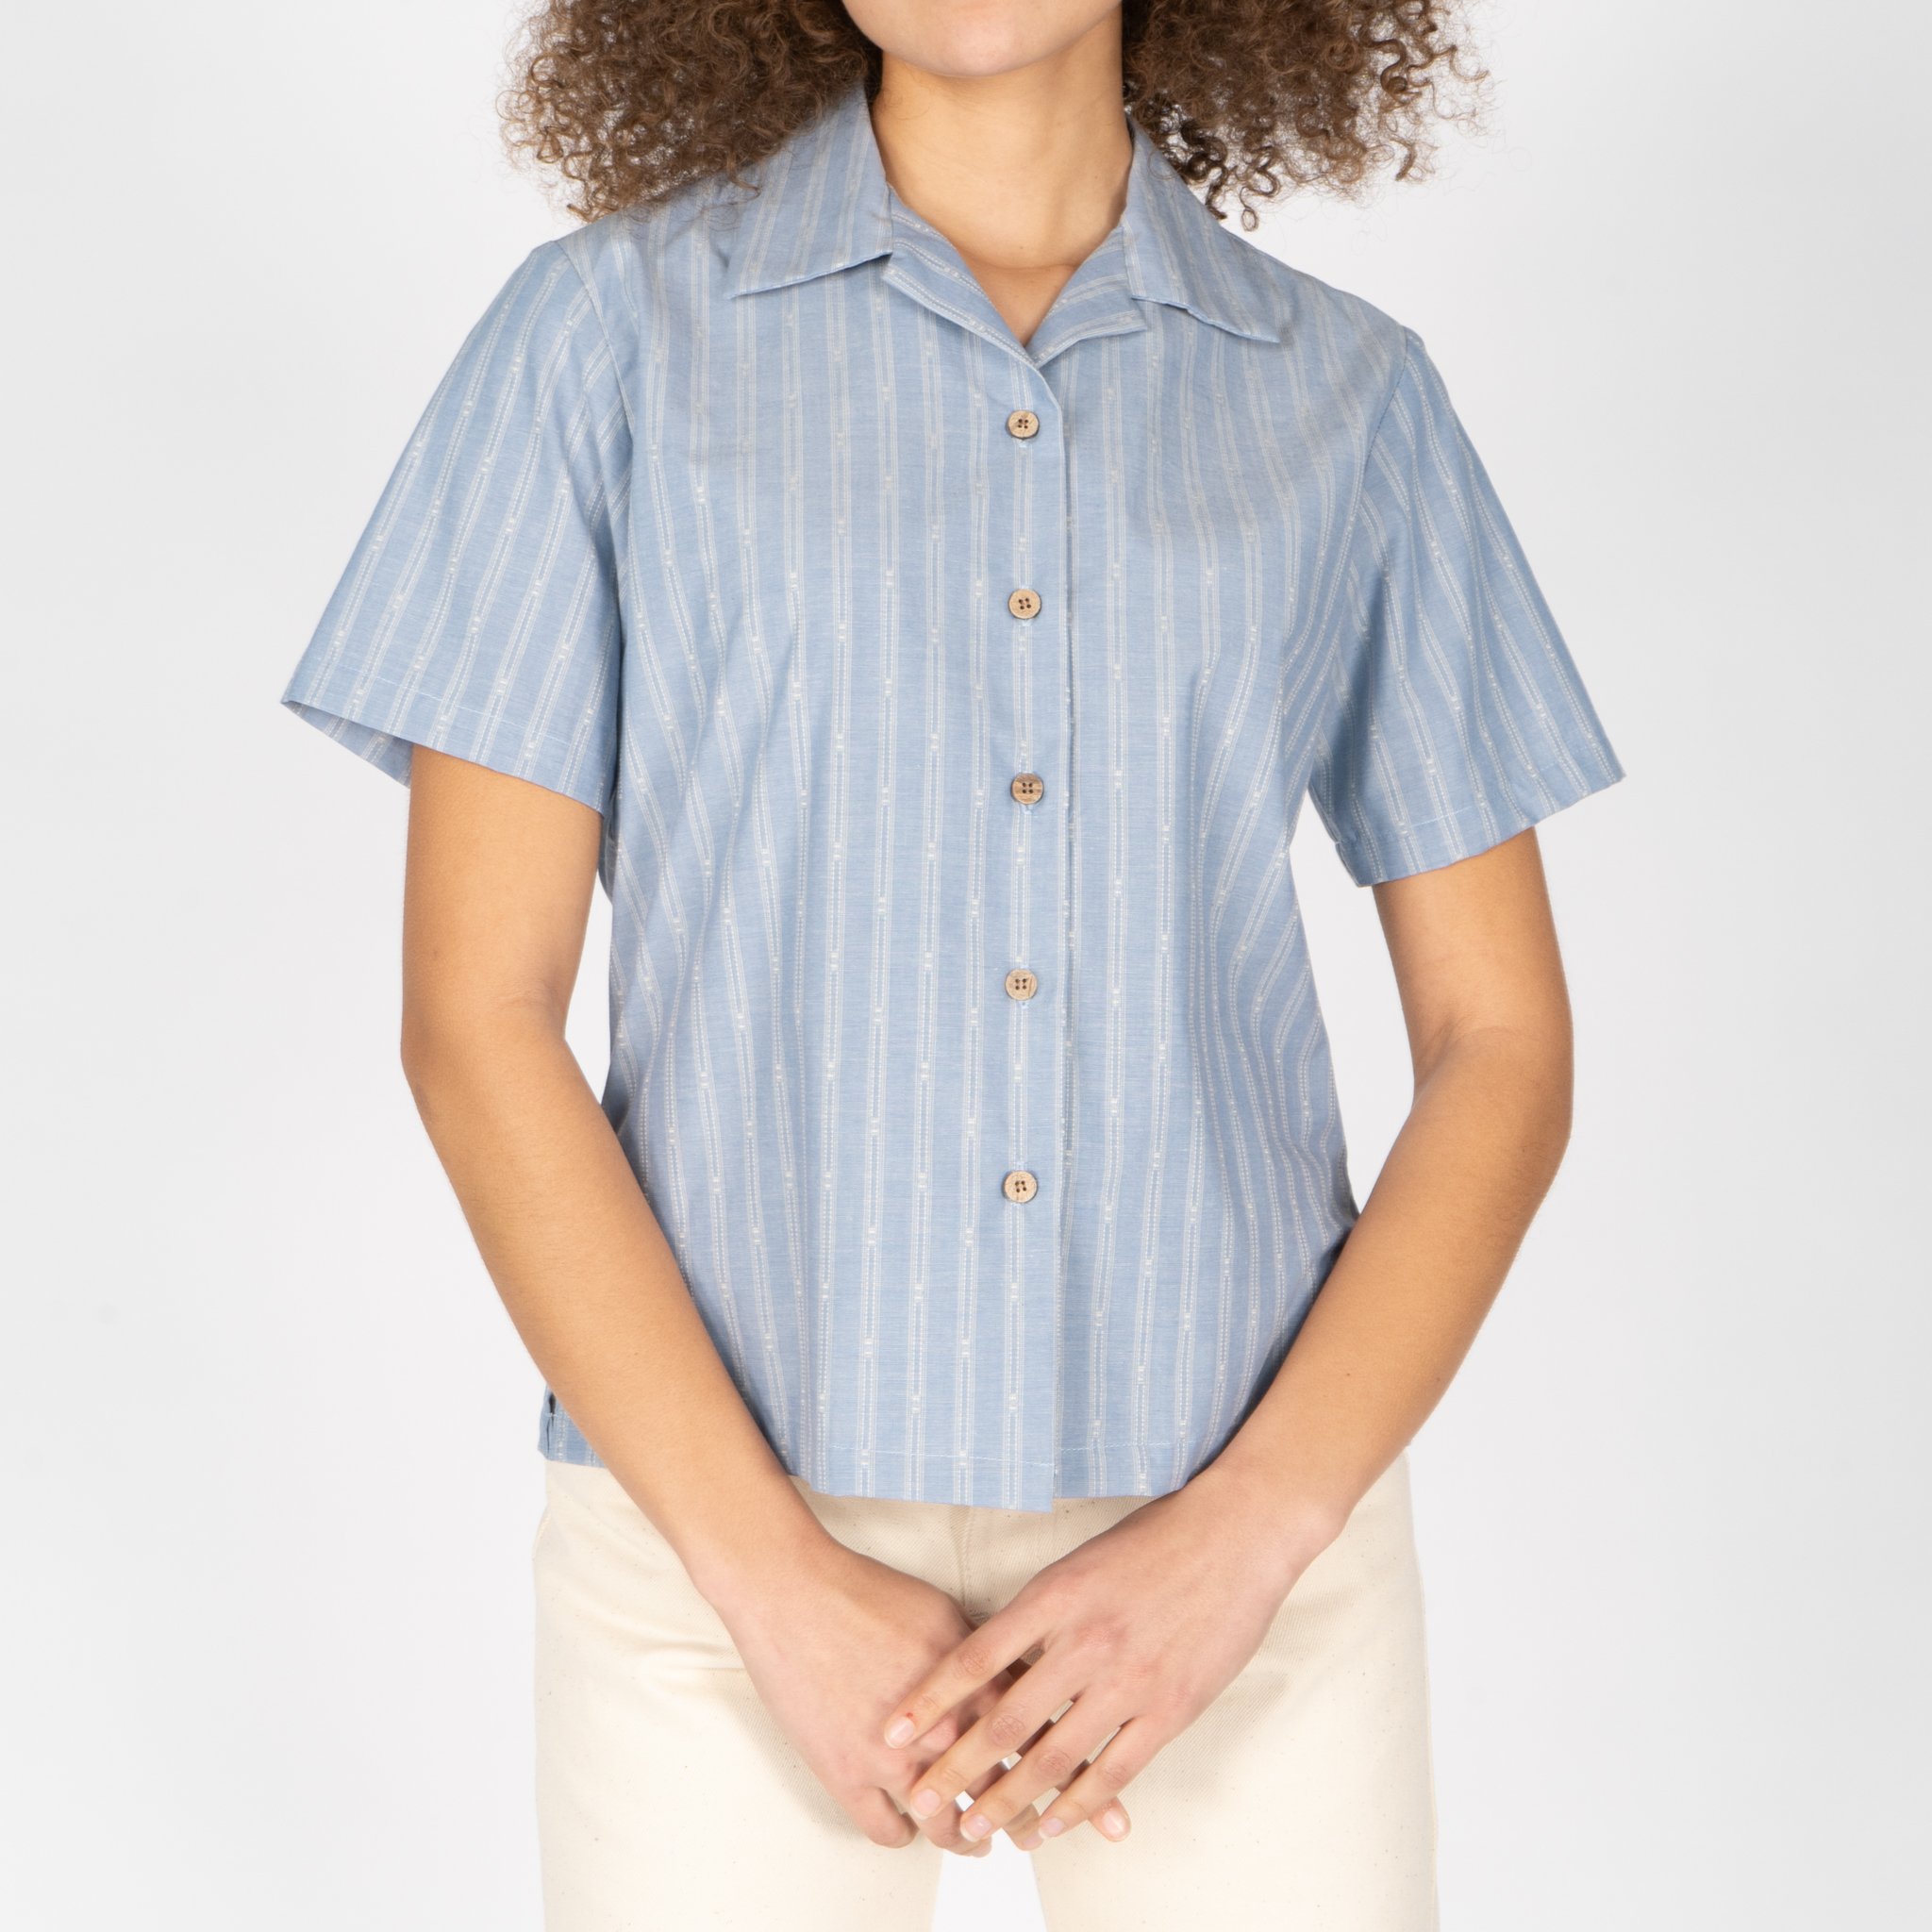 Women's Camp Collar Shirt - Vintage Dobby Stripes | Naked & Famous